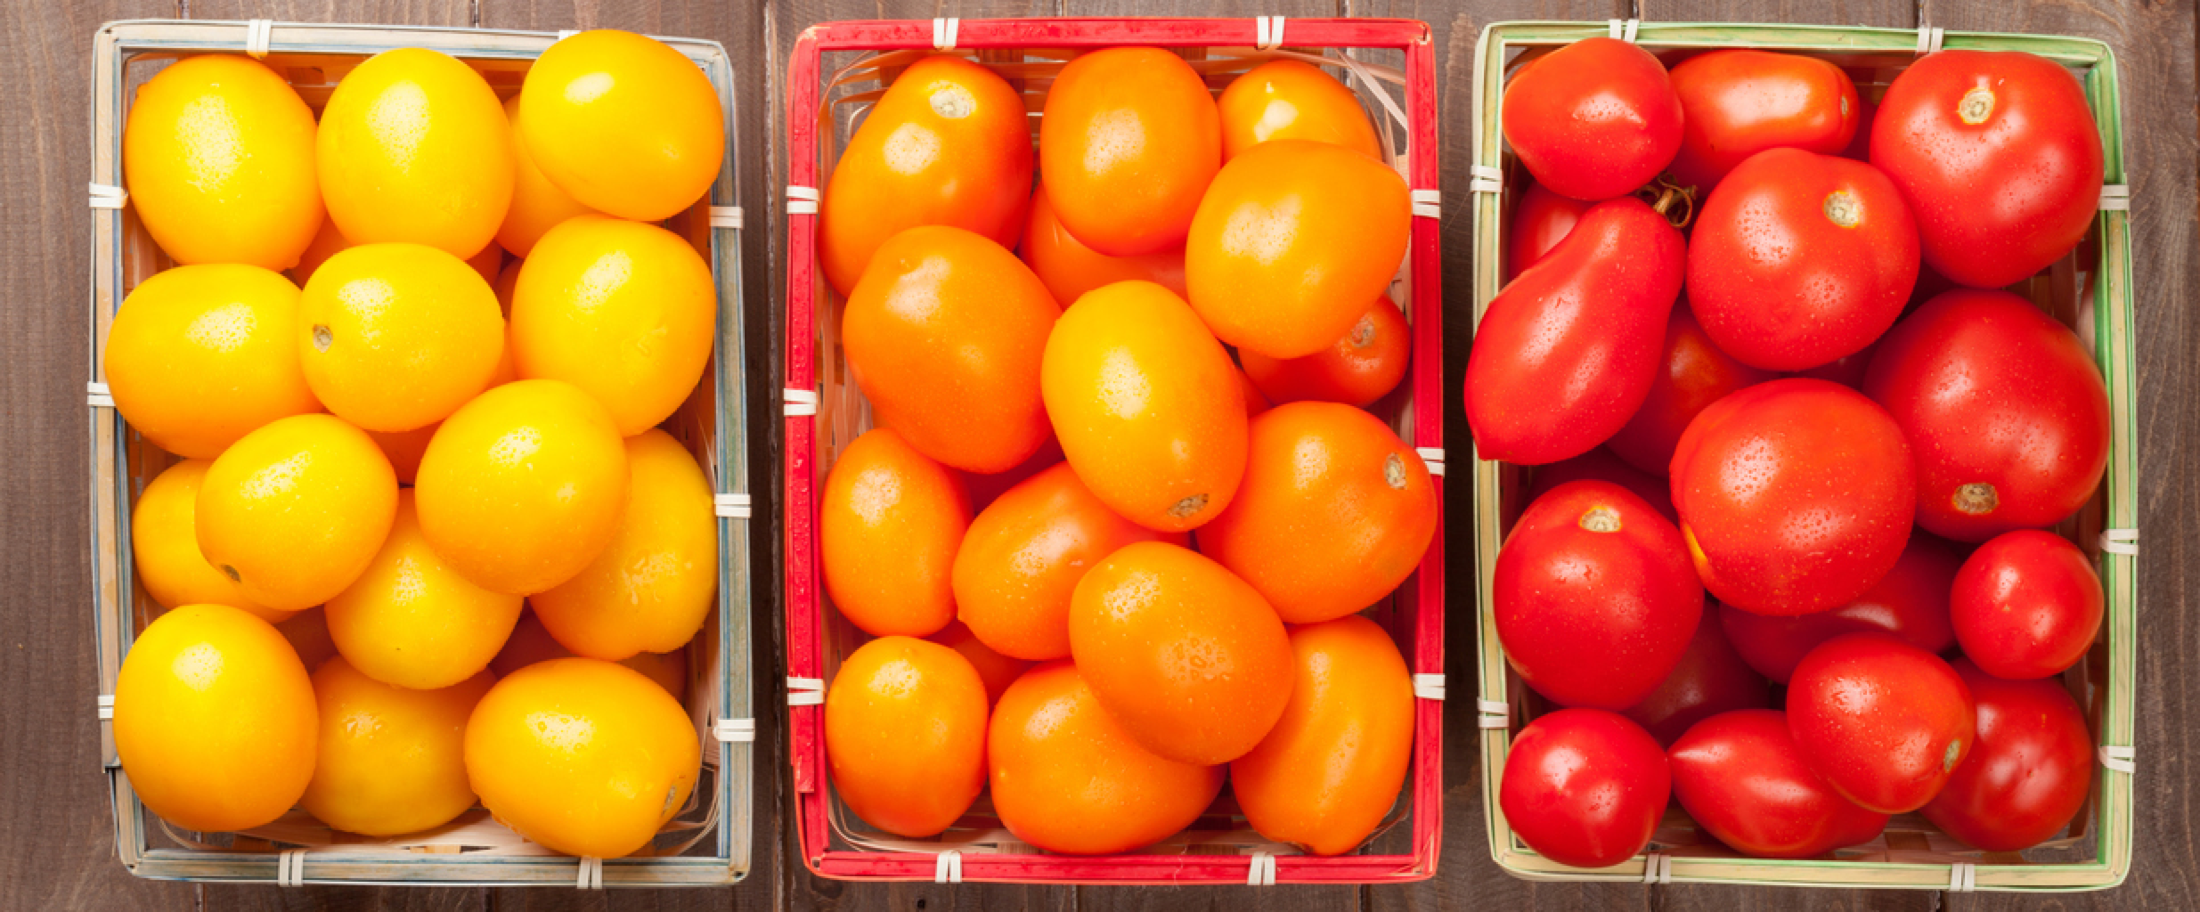 Three boxes of colorful tomatoes